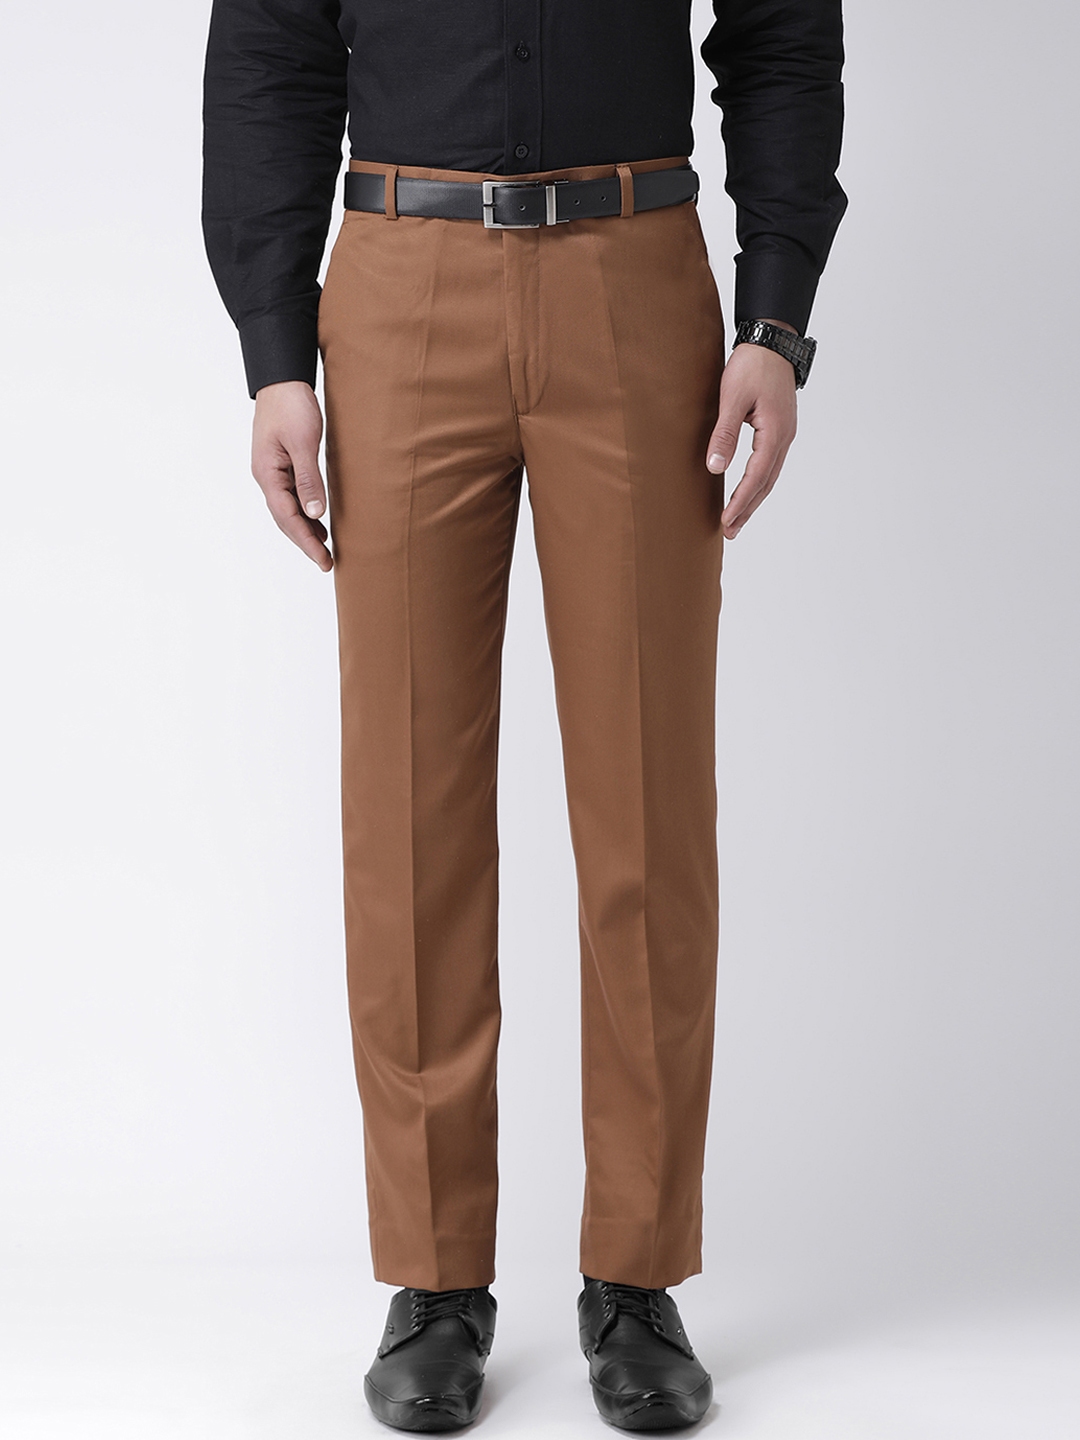 Brooklyn  Brown Cotton Lycra Trousers TR19008  Uathayam